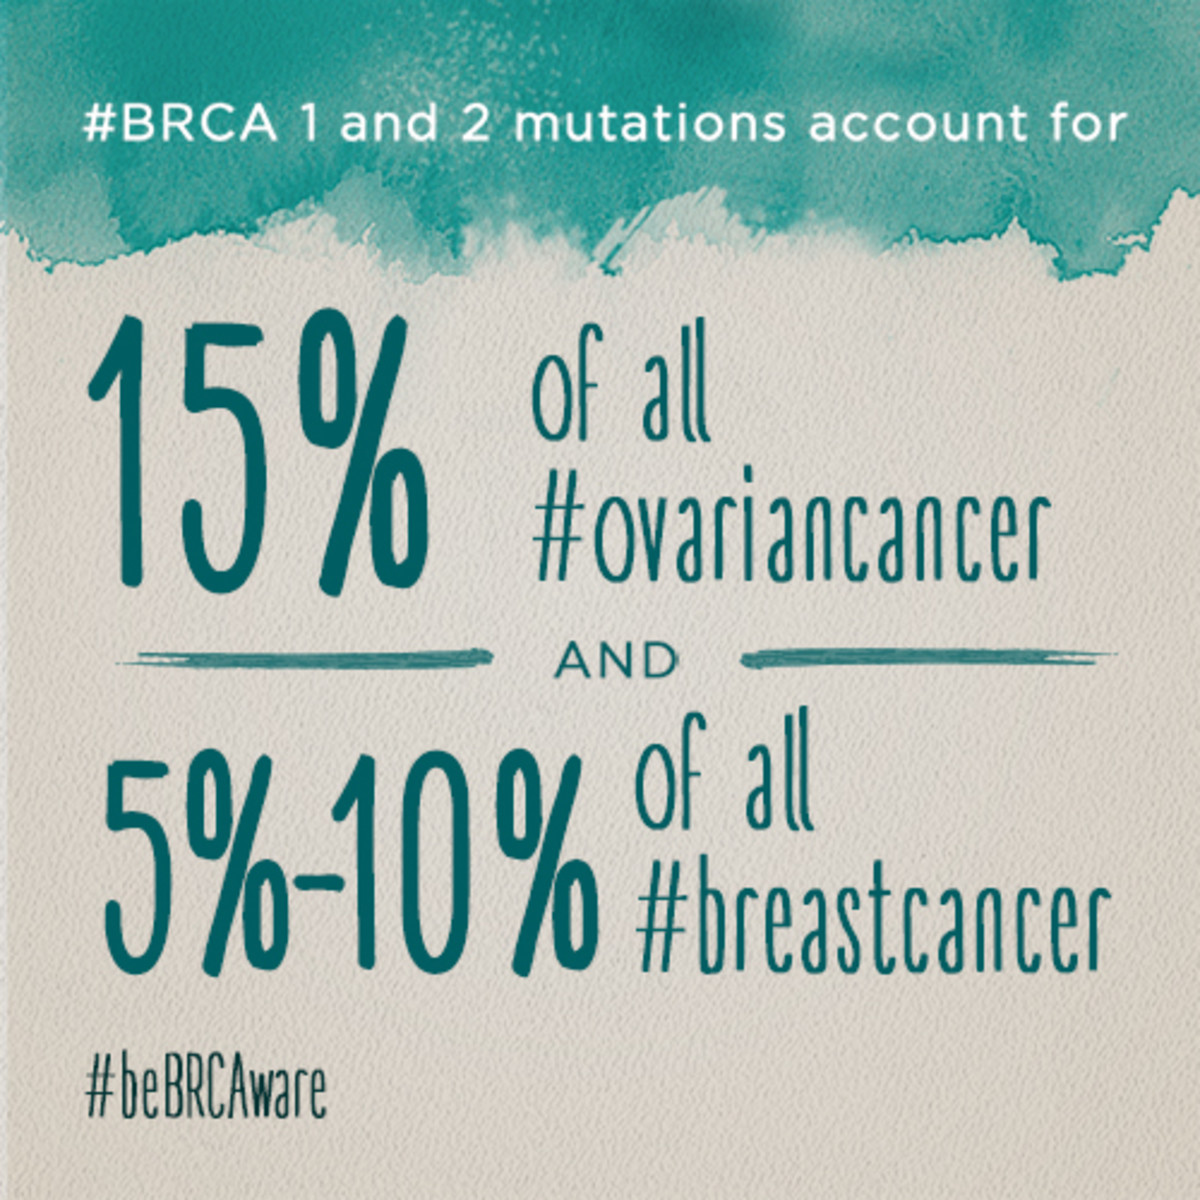 BRCA mutations account for a significant number of breast and ovarian cancer diagnoses. 